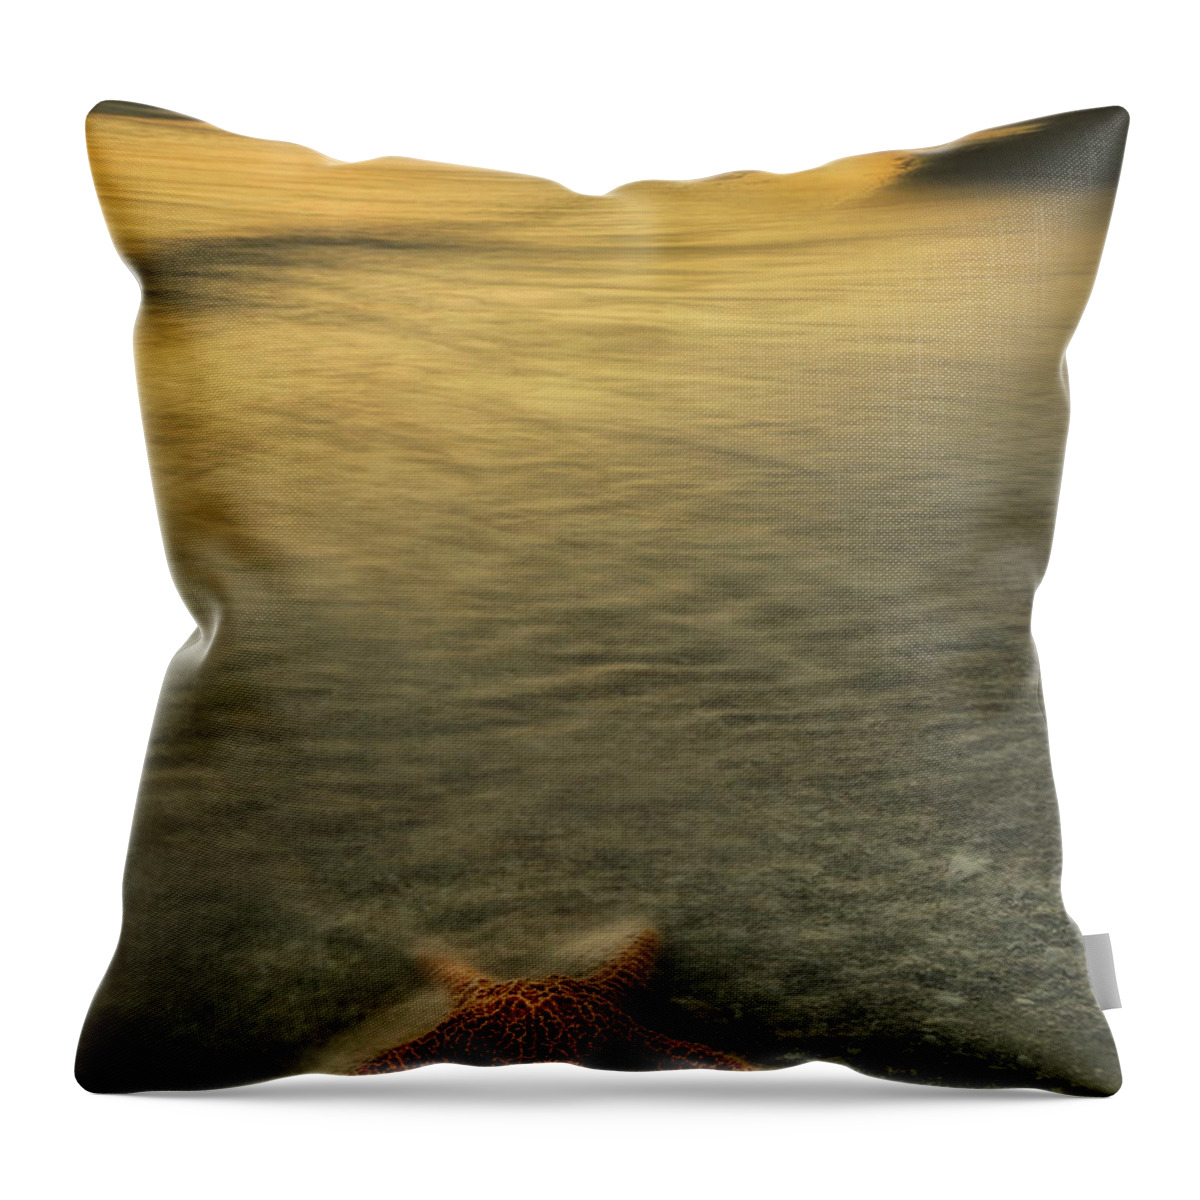 Starfish Throw Pillow featuring the photograph Tranquility by Darylann Leonard Photography